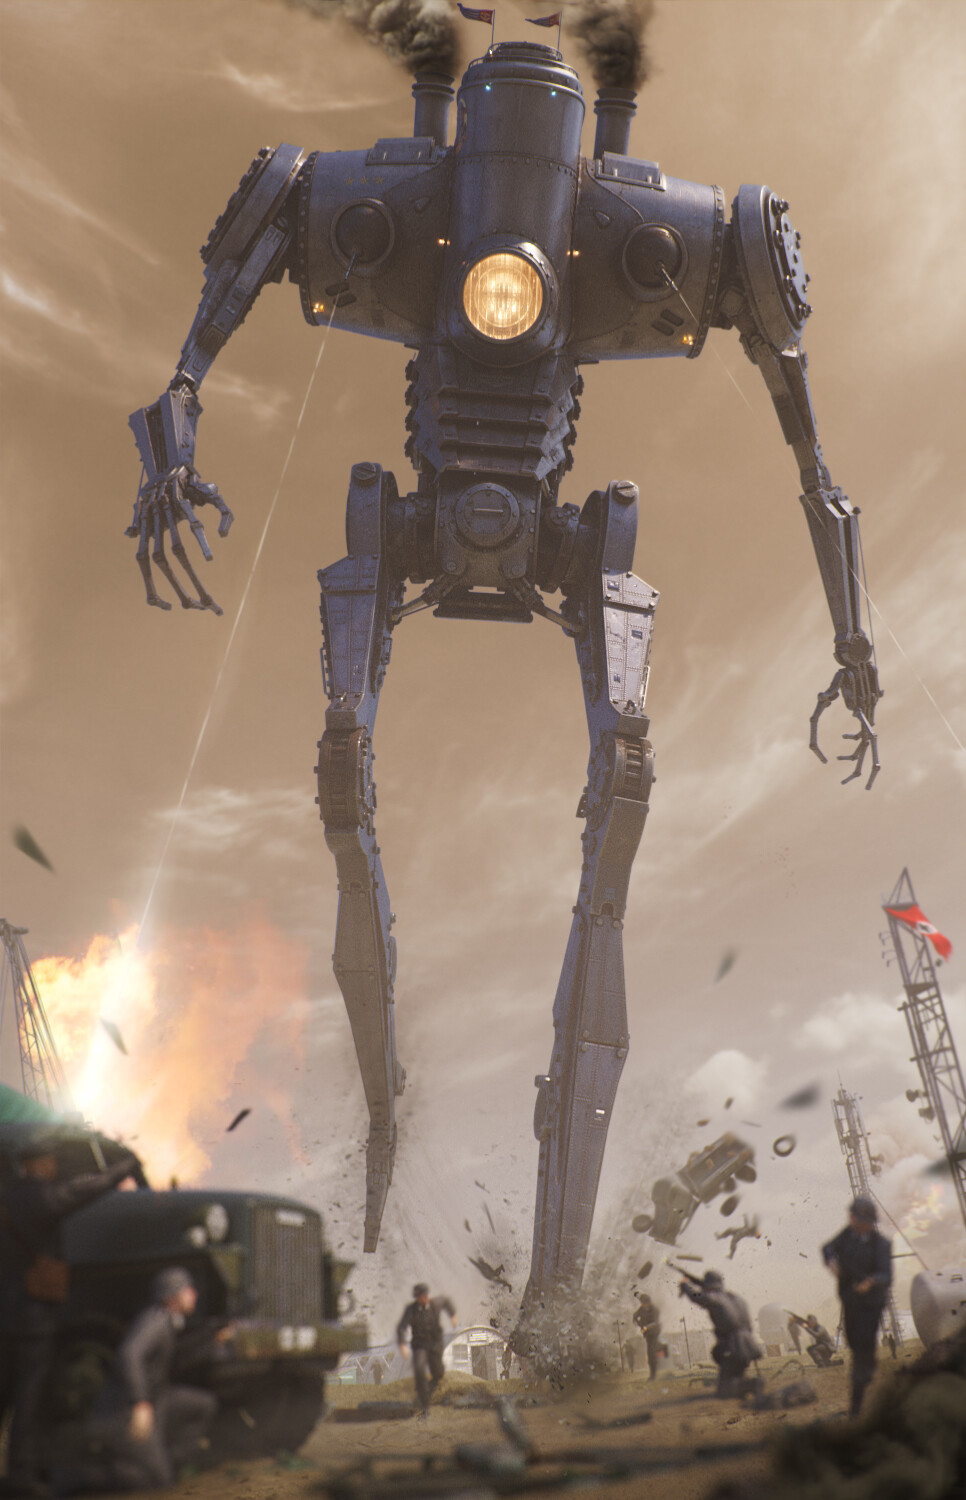 ArtStation - BOO-HOO a giant robot is storming the base :(